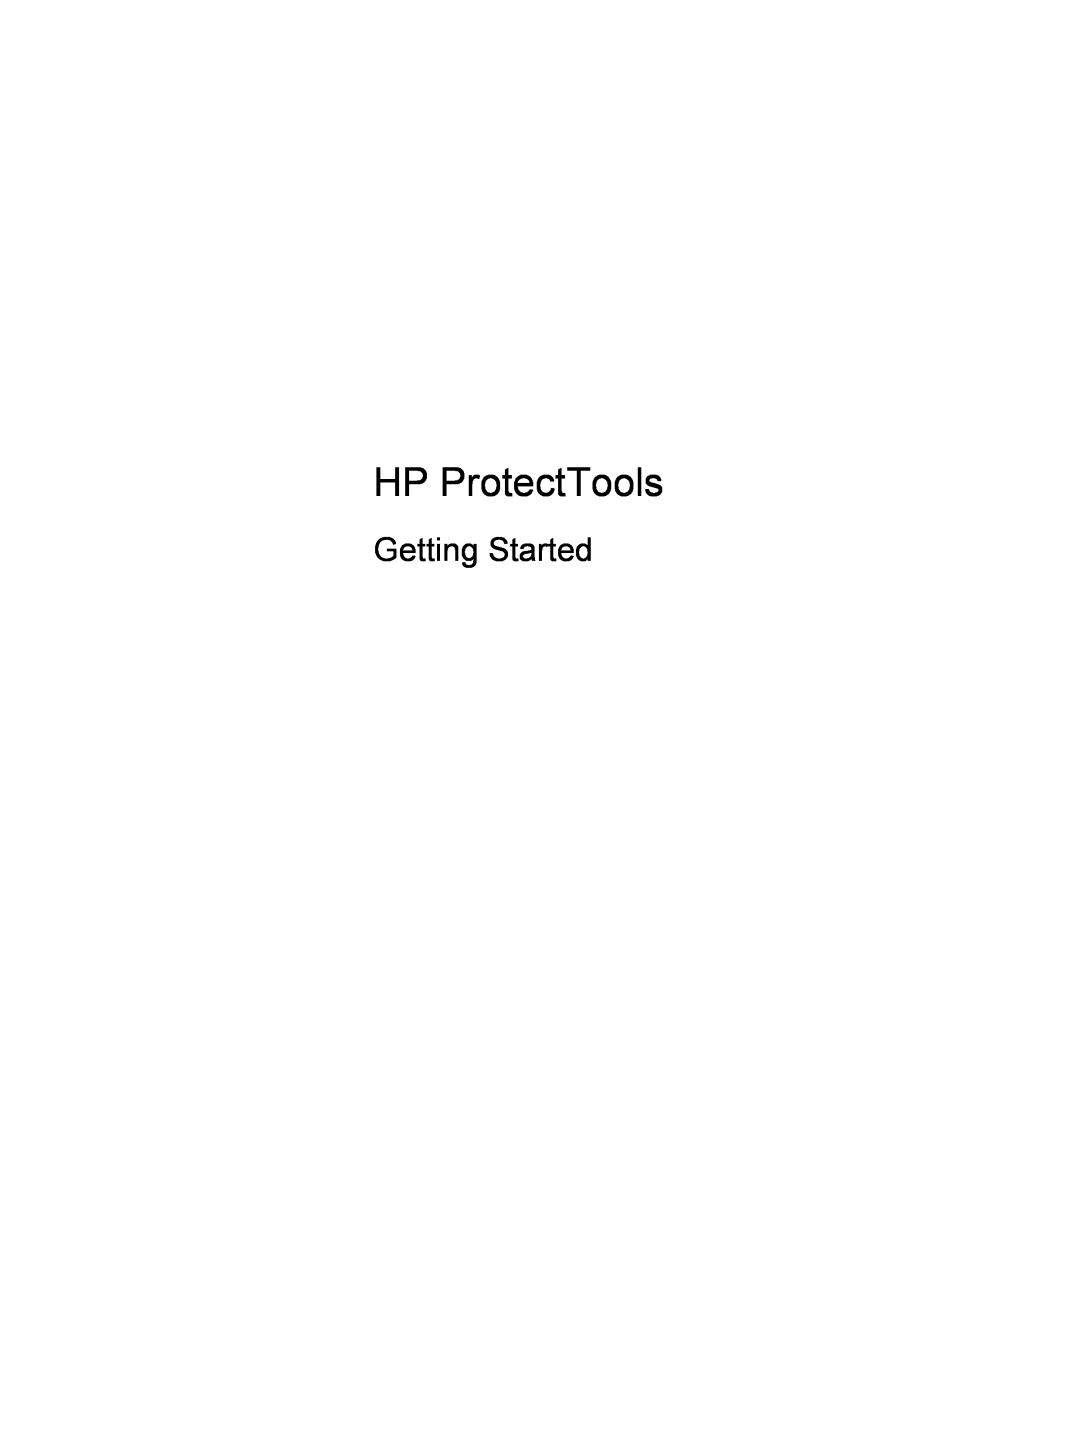 HP 2 Base Model manual HP ProtectTools, Getting Started 